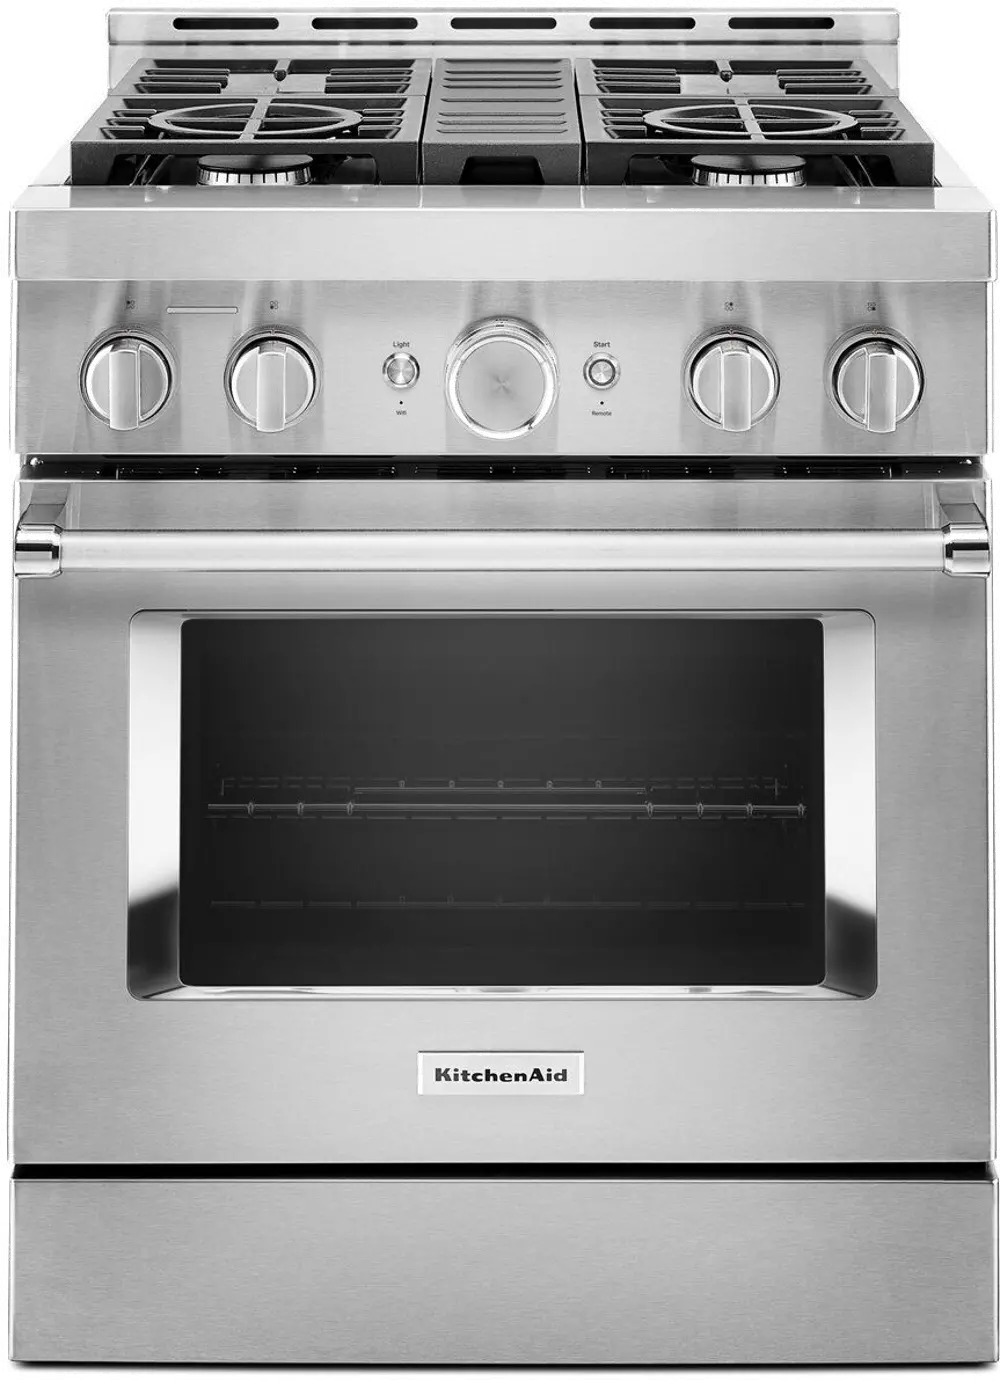 KFGC500JSS KitchenAid 4.1 cu ft Commercial Gas Range - 30 Inch, Stainless Steel-1